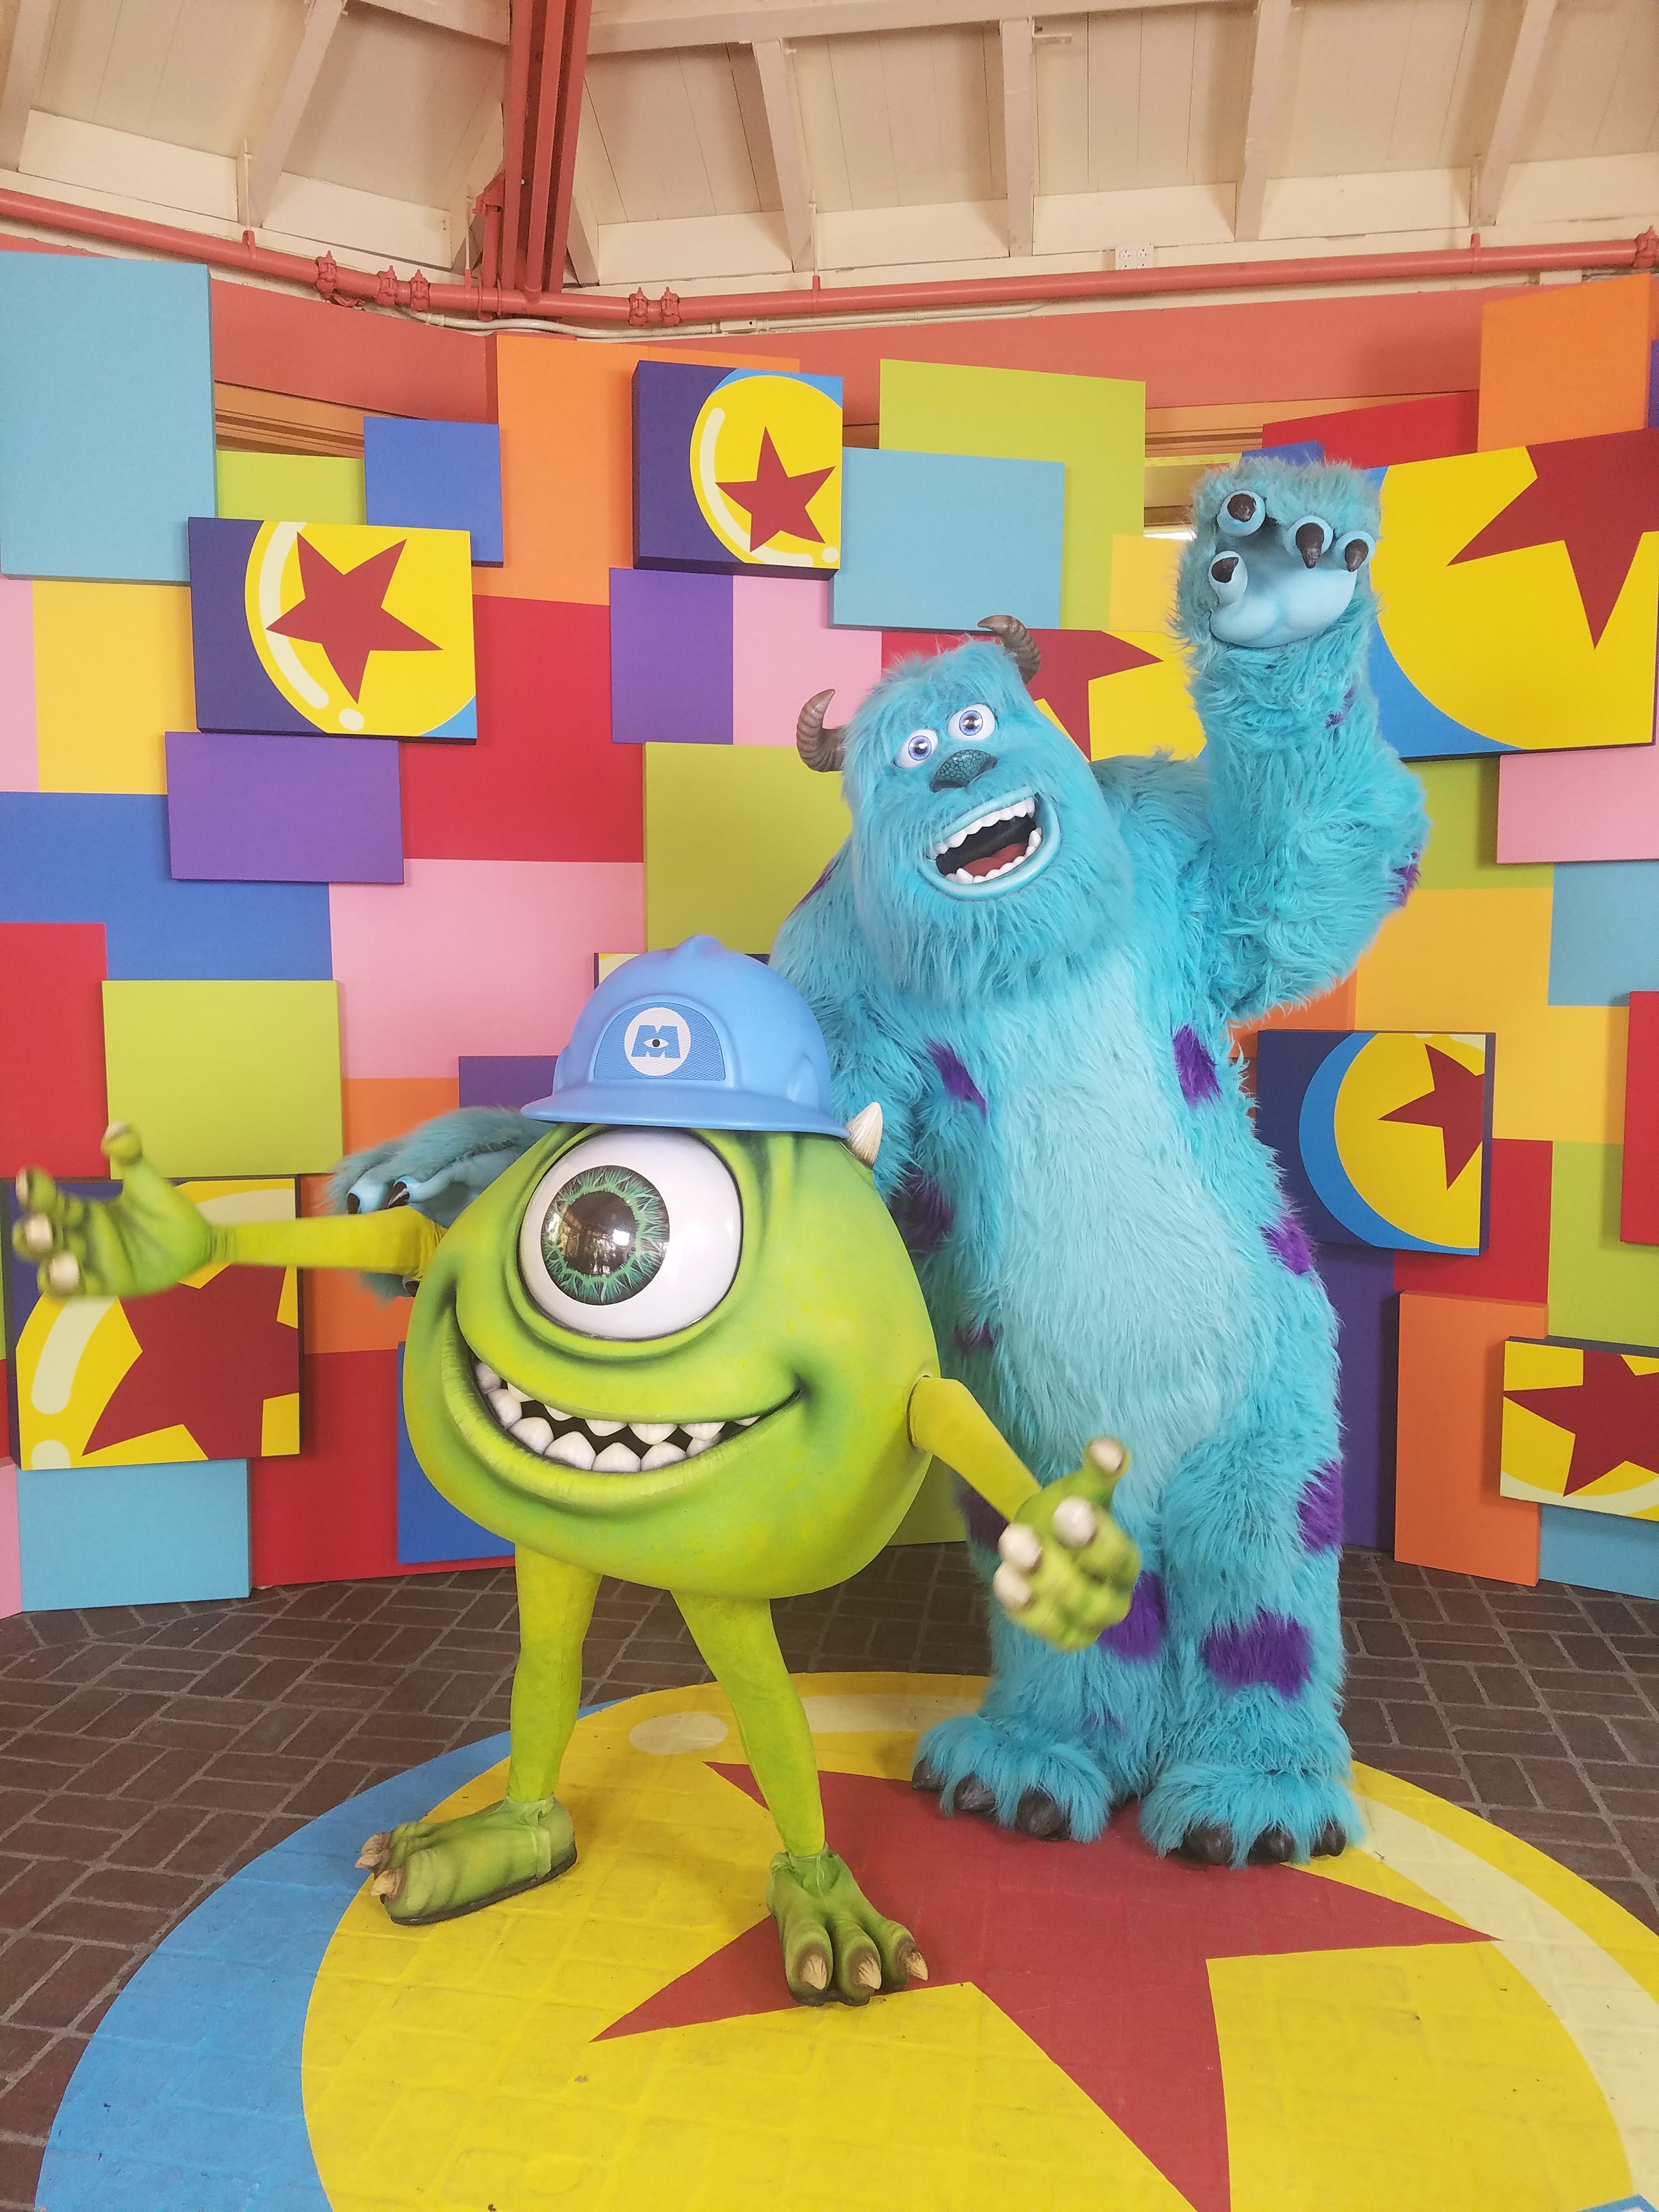 Meet Mike and Sulley from Monsters Inc at Pixar Fest